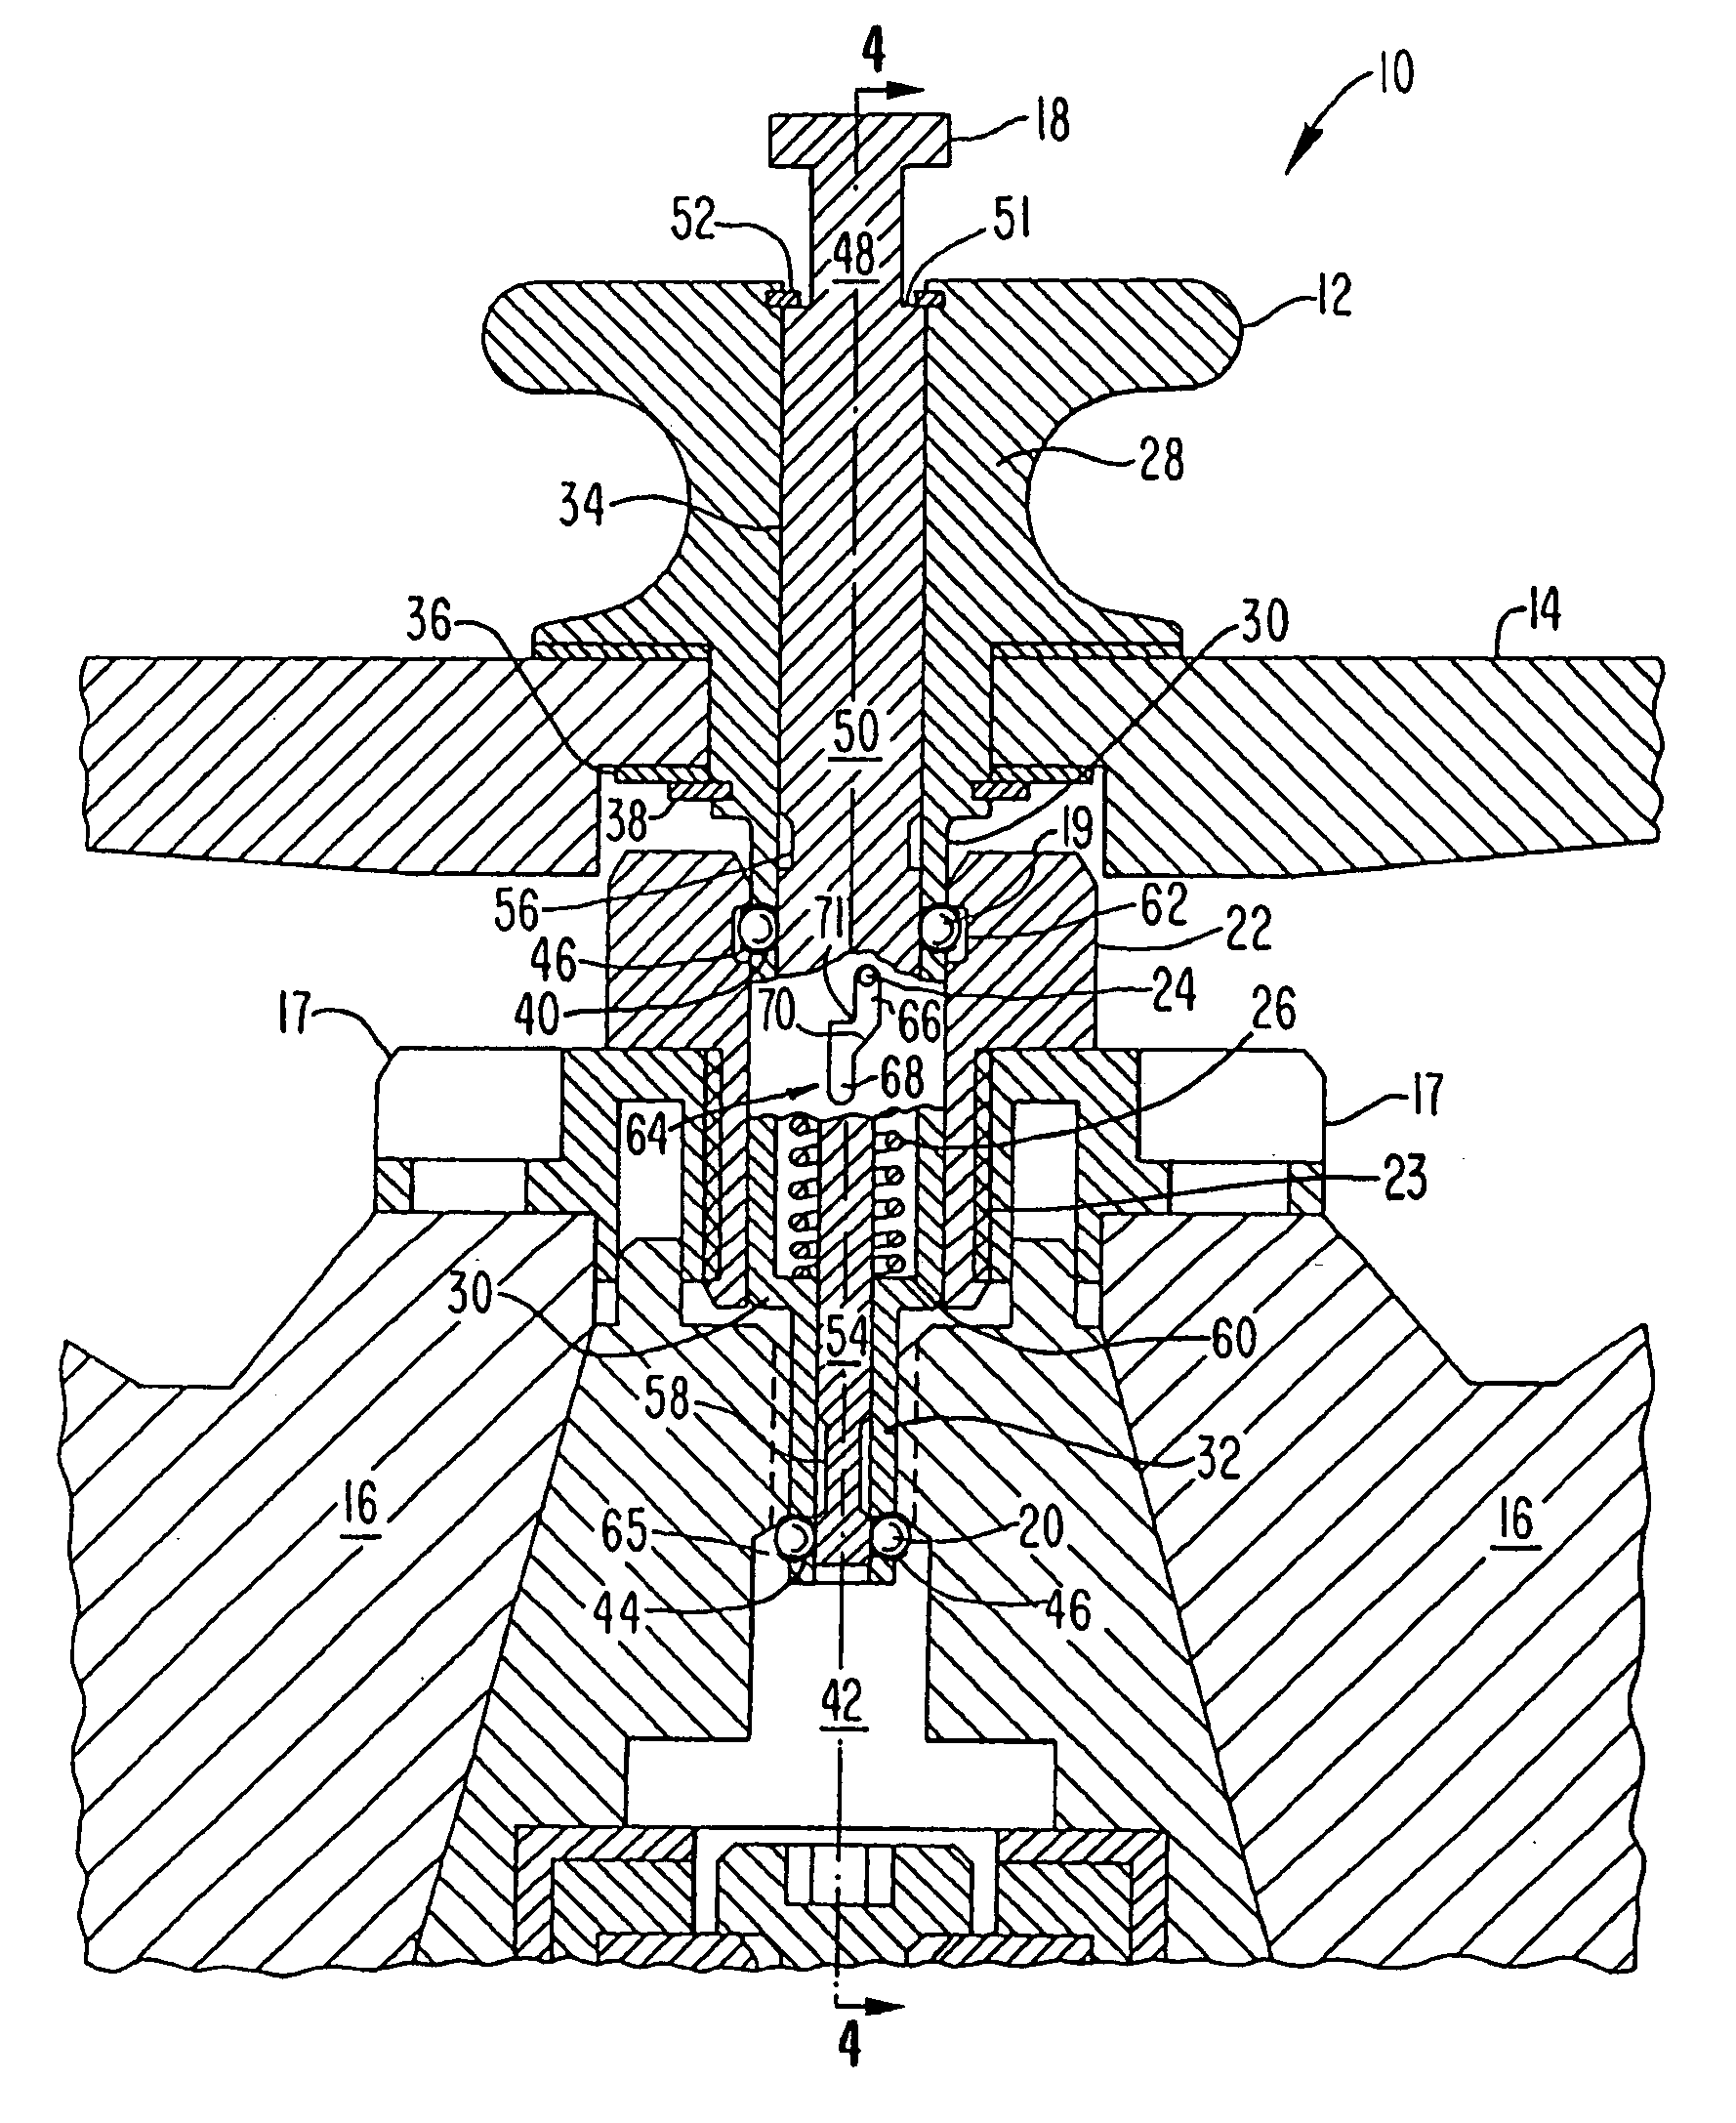 Attachment and release apparatus for a centrifuge rotor cover